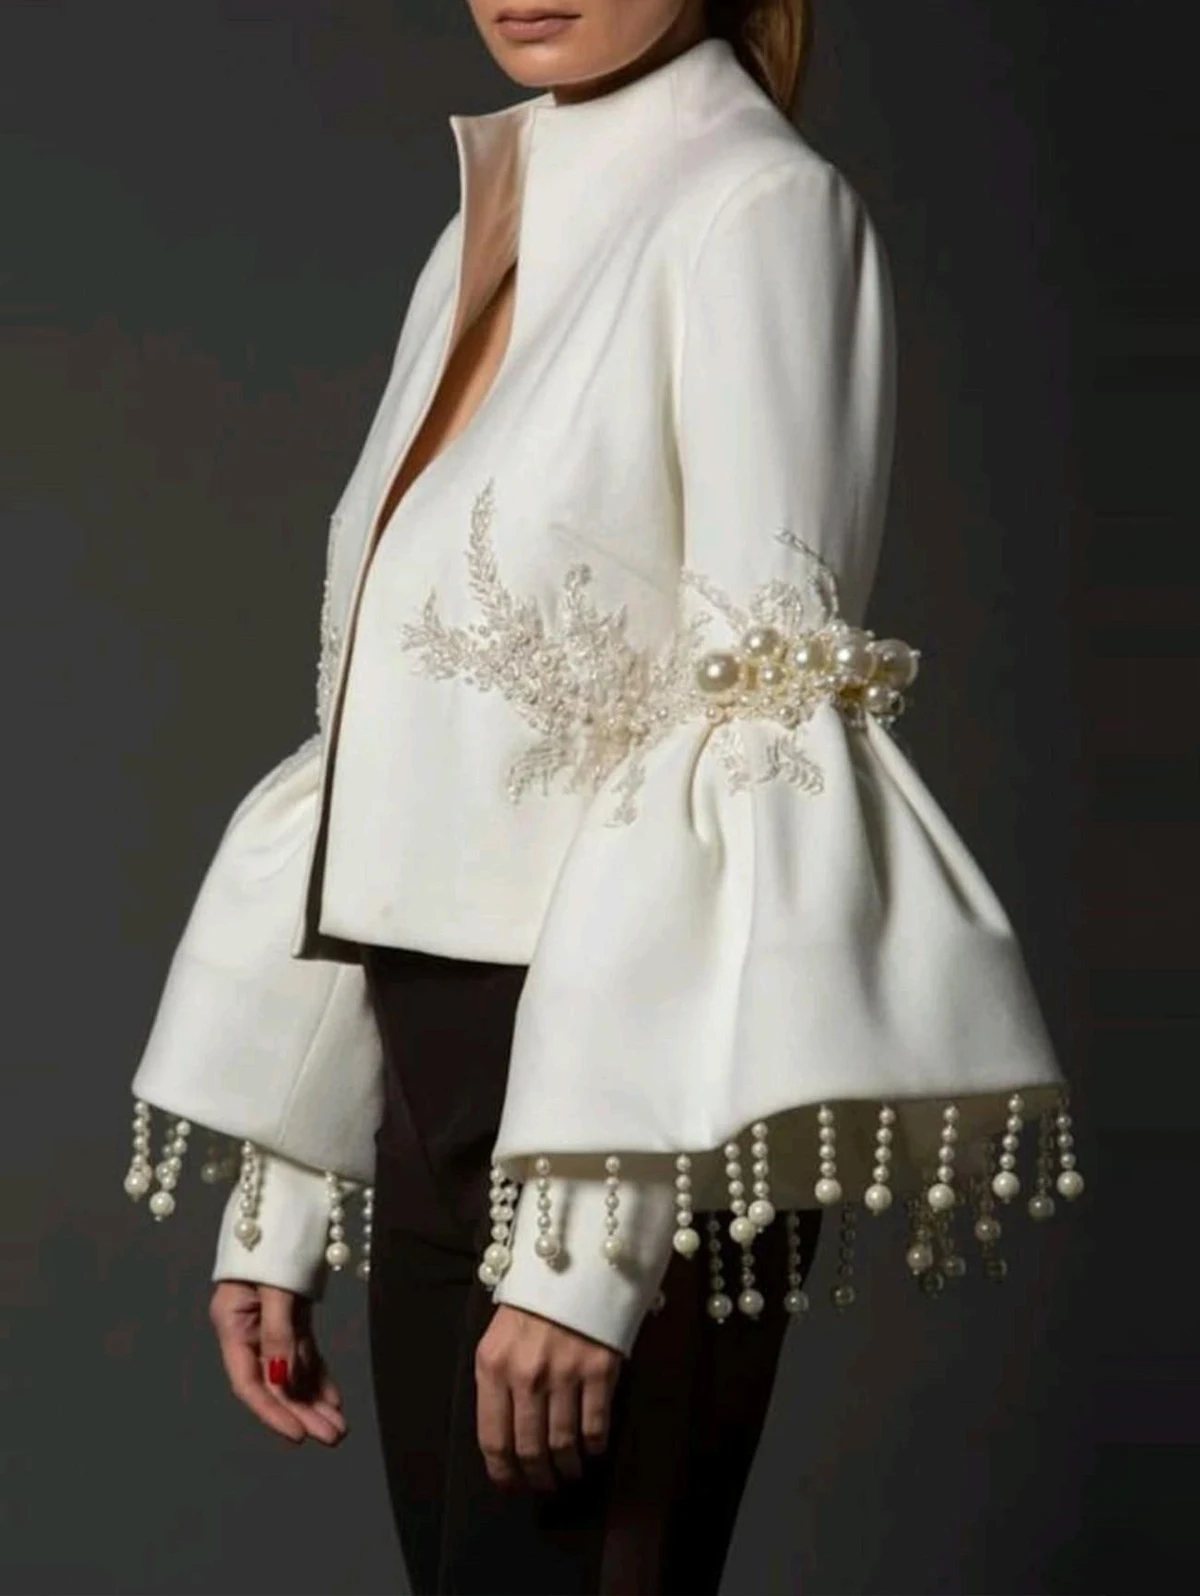 Vintage Elegant Stand Collar Jackets Women Spring Pearl Fringed Decor Embroidery Flared Sleeves Coat Party Evening Outerwears